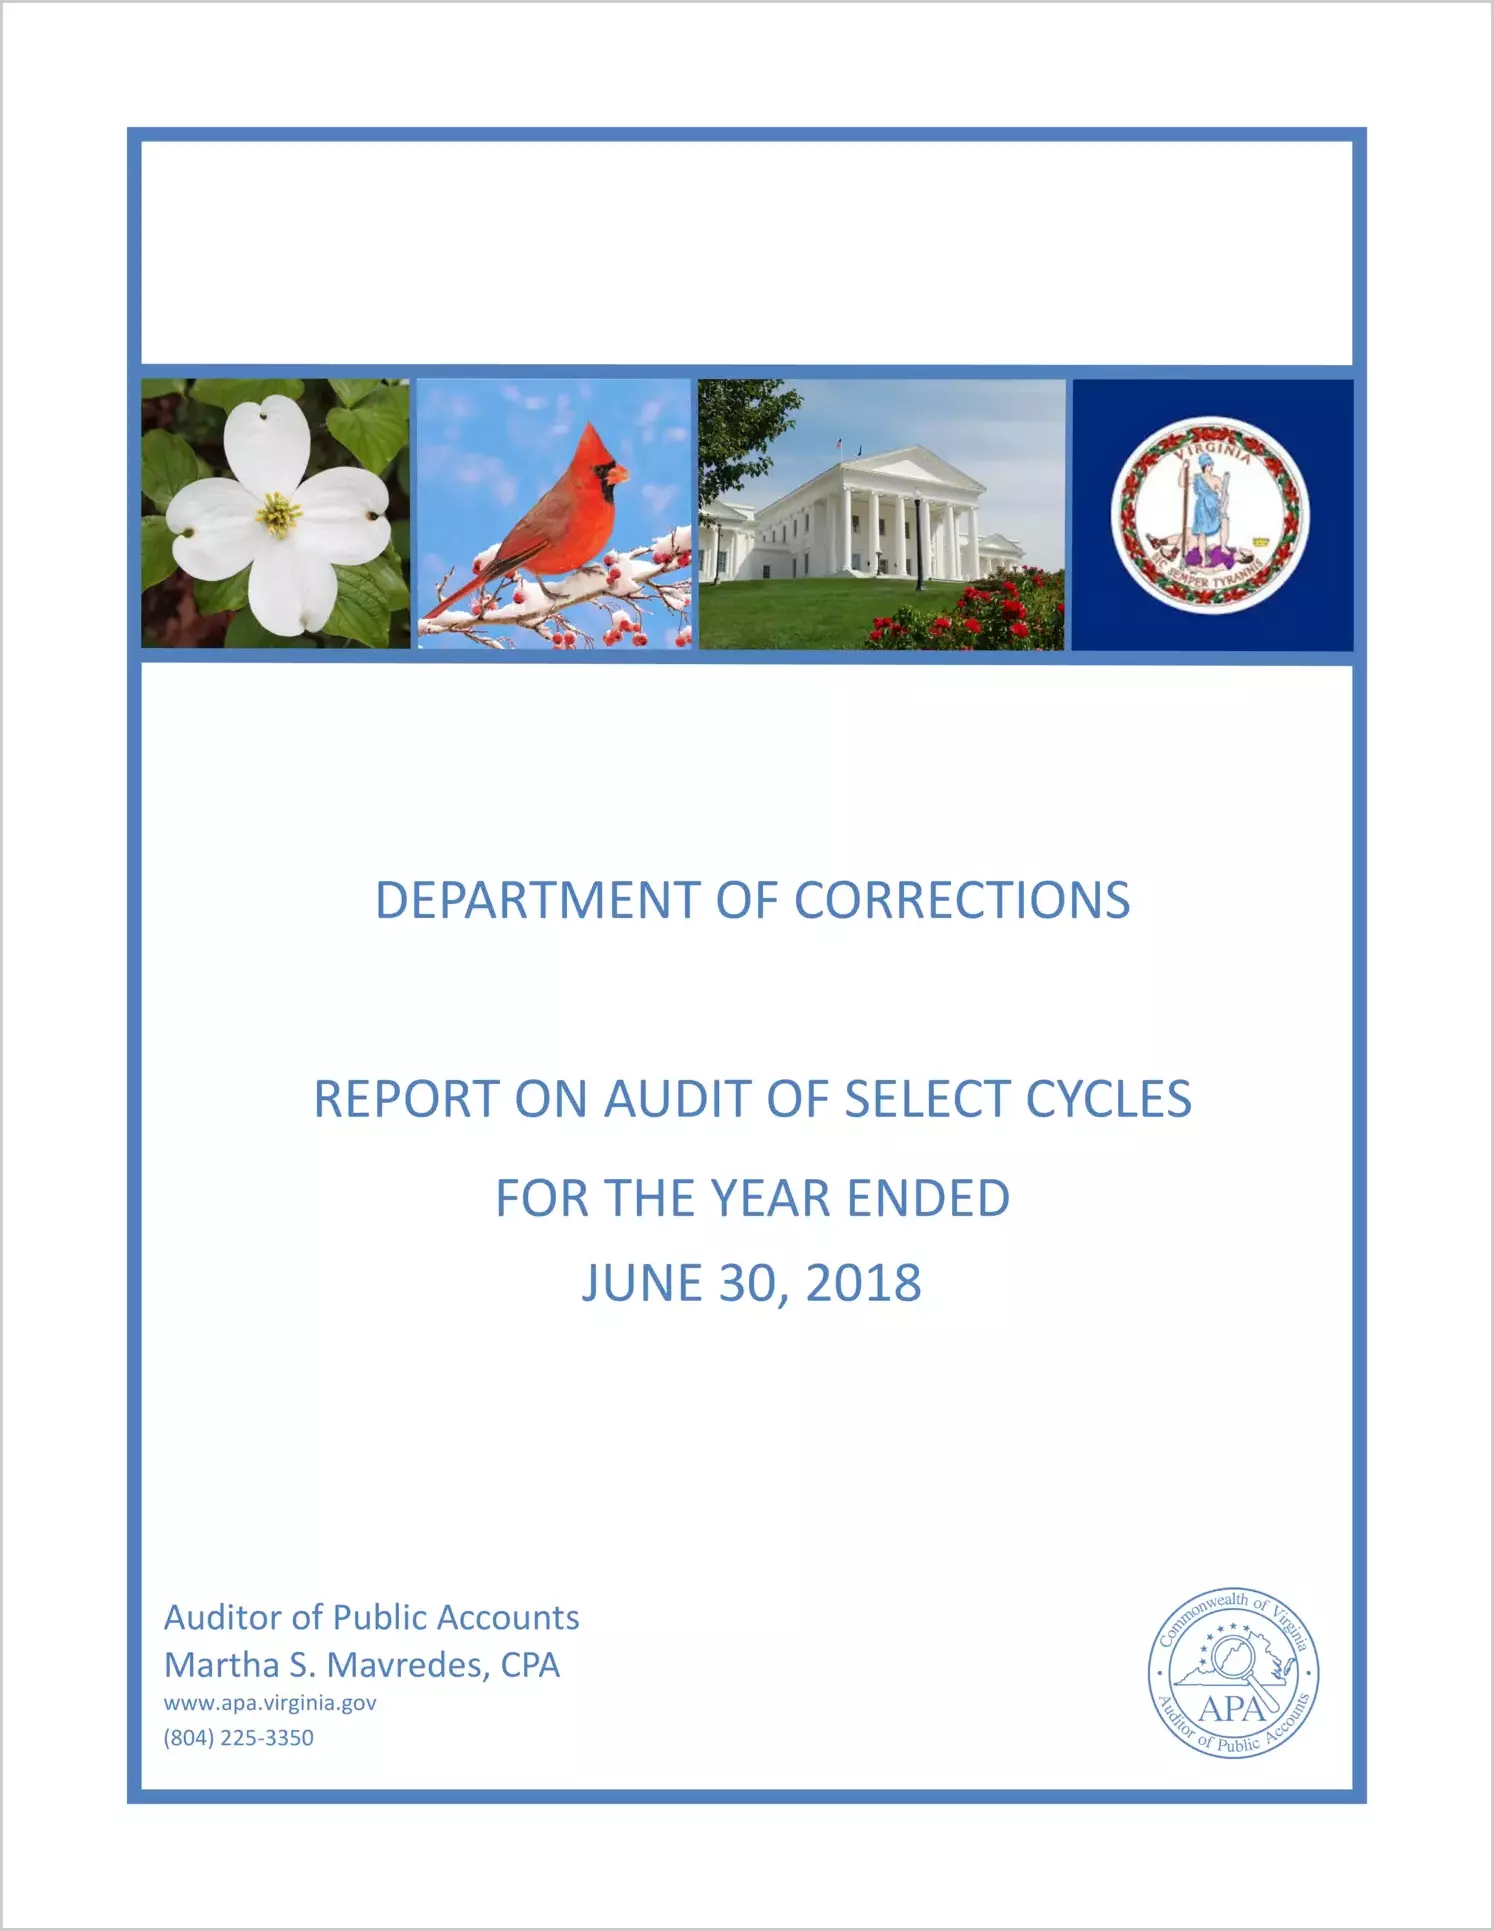 Department of Corrections Audit of Select Cycles for the year ended June 30, 2018